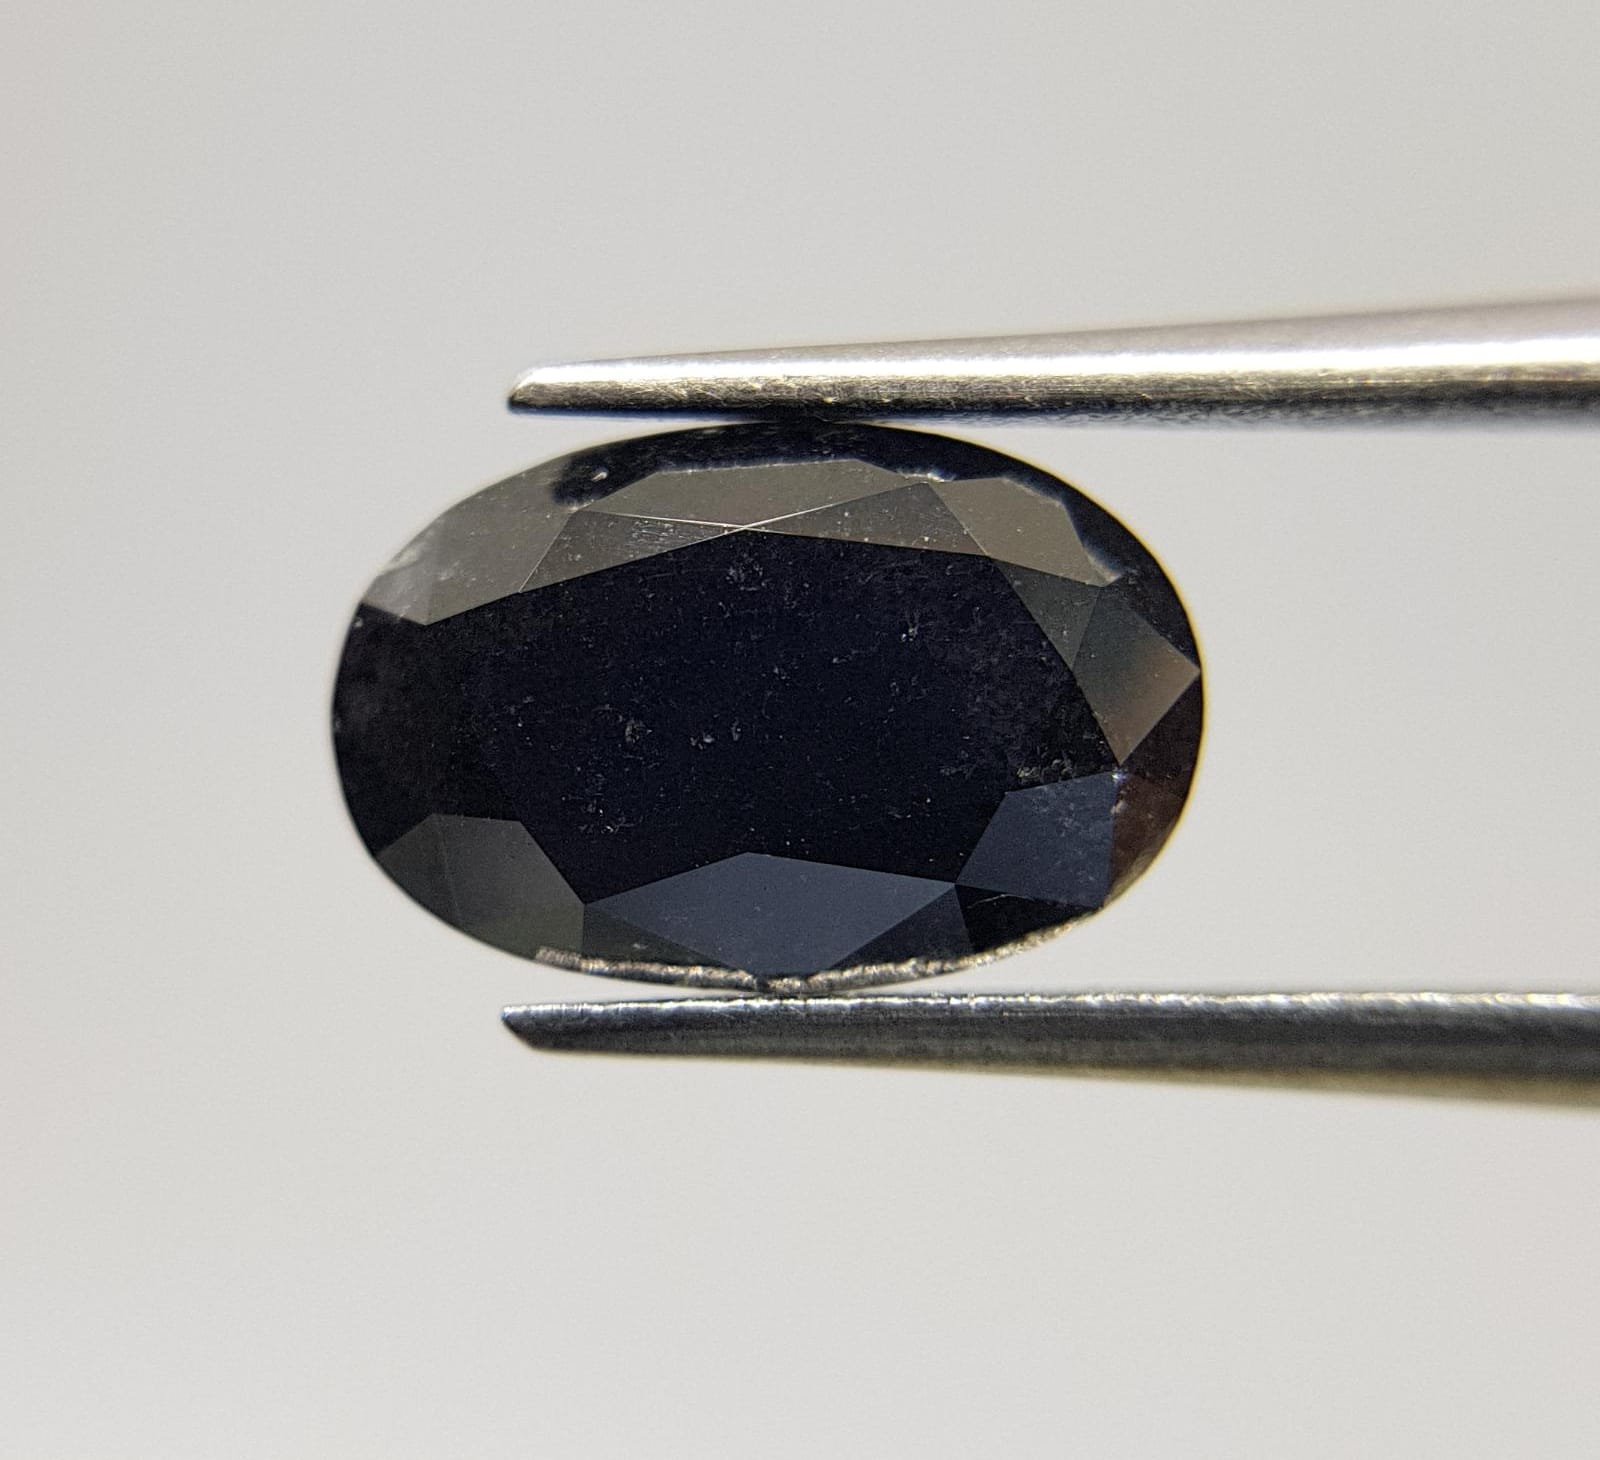 Black diamonds can symbolize many things, including inner power, strength, or sorrow